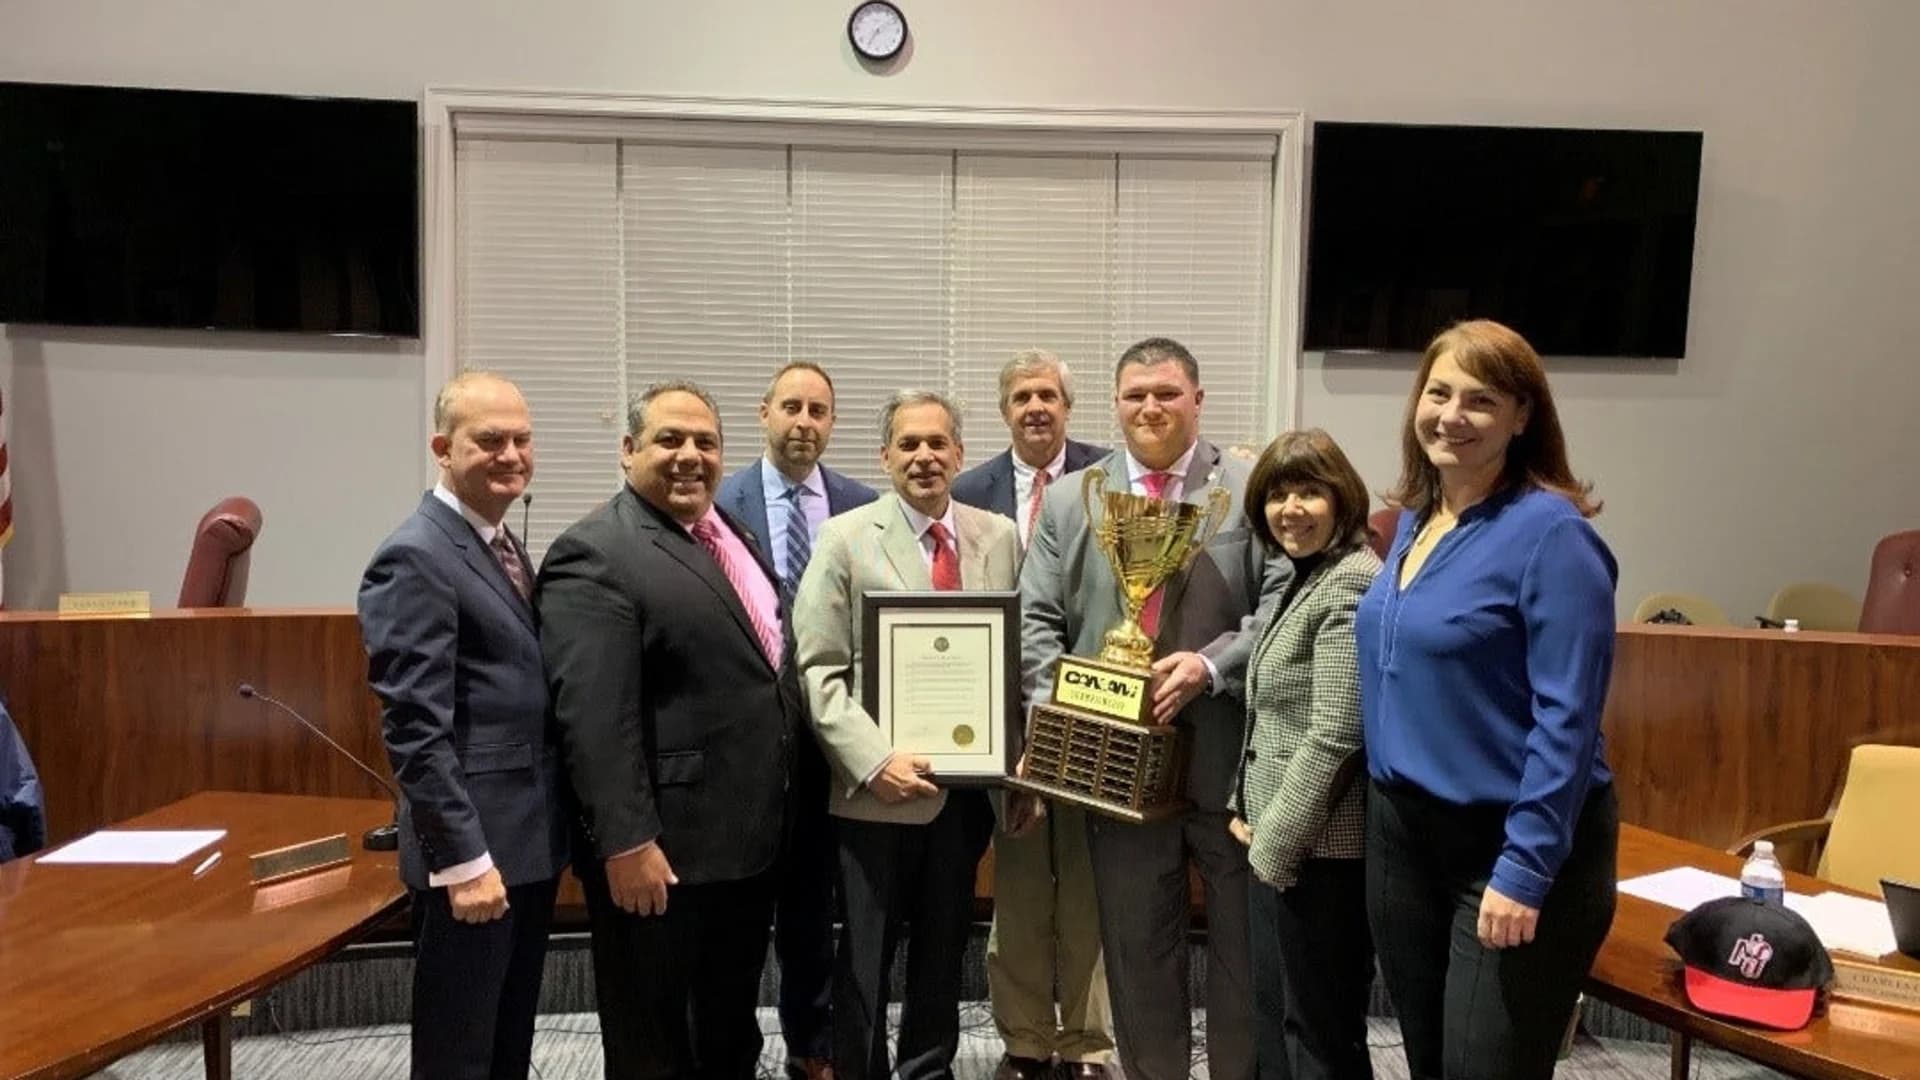 Oct. 21, 2019 recognized as New Jersey Jackals Day following championship